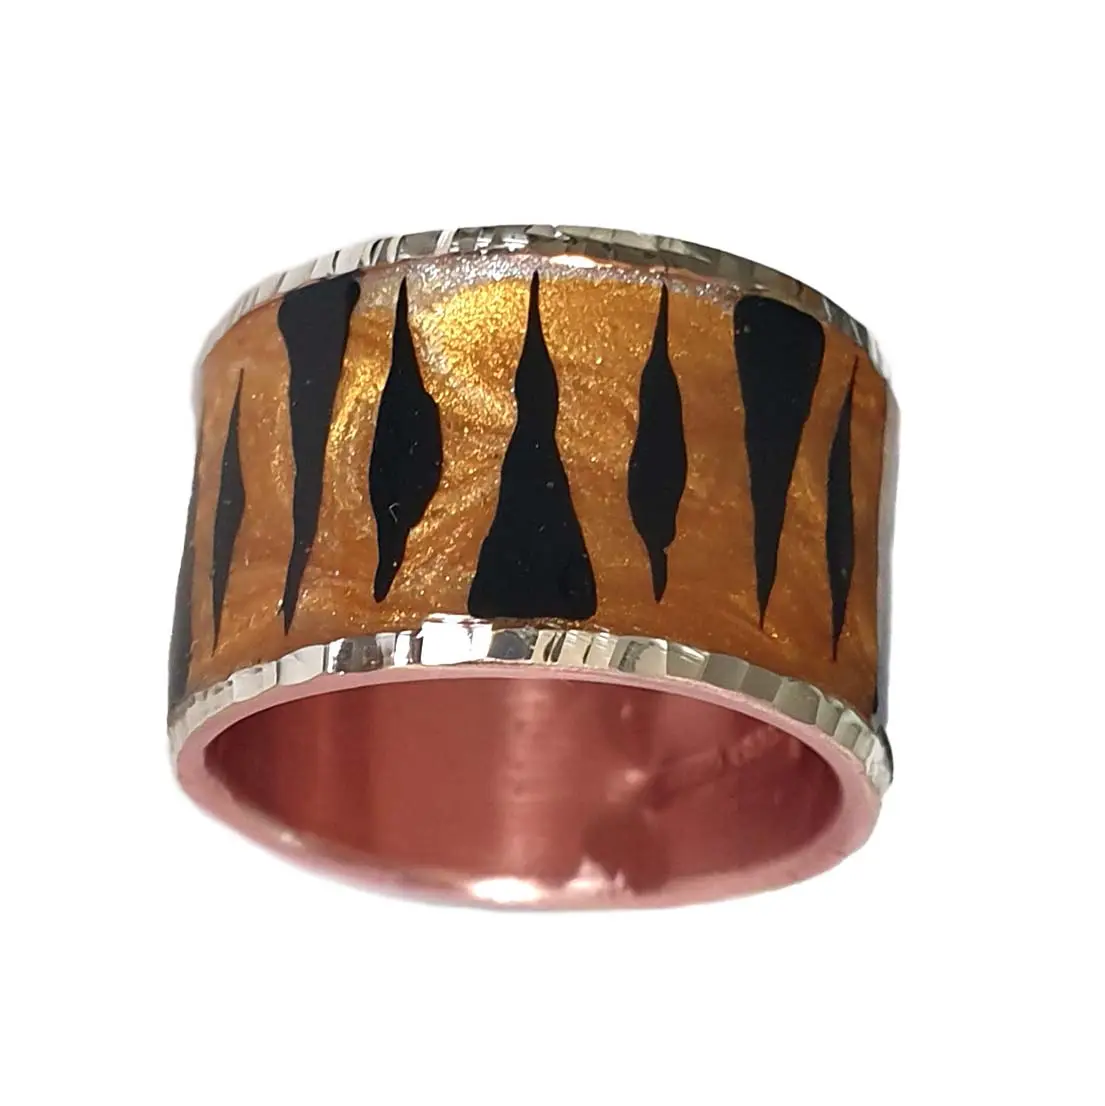 Wide band ring in rose gold plated 925 silverhand-decorated ring with tiger-patterned enamel and diamond-cut edge